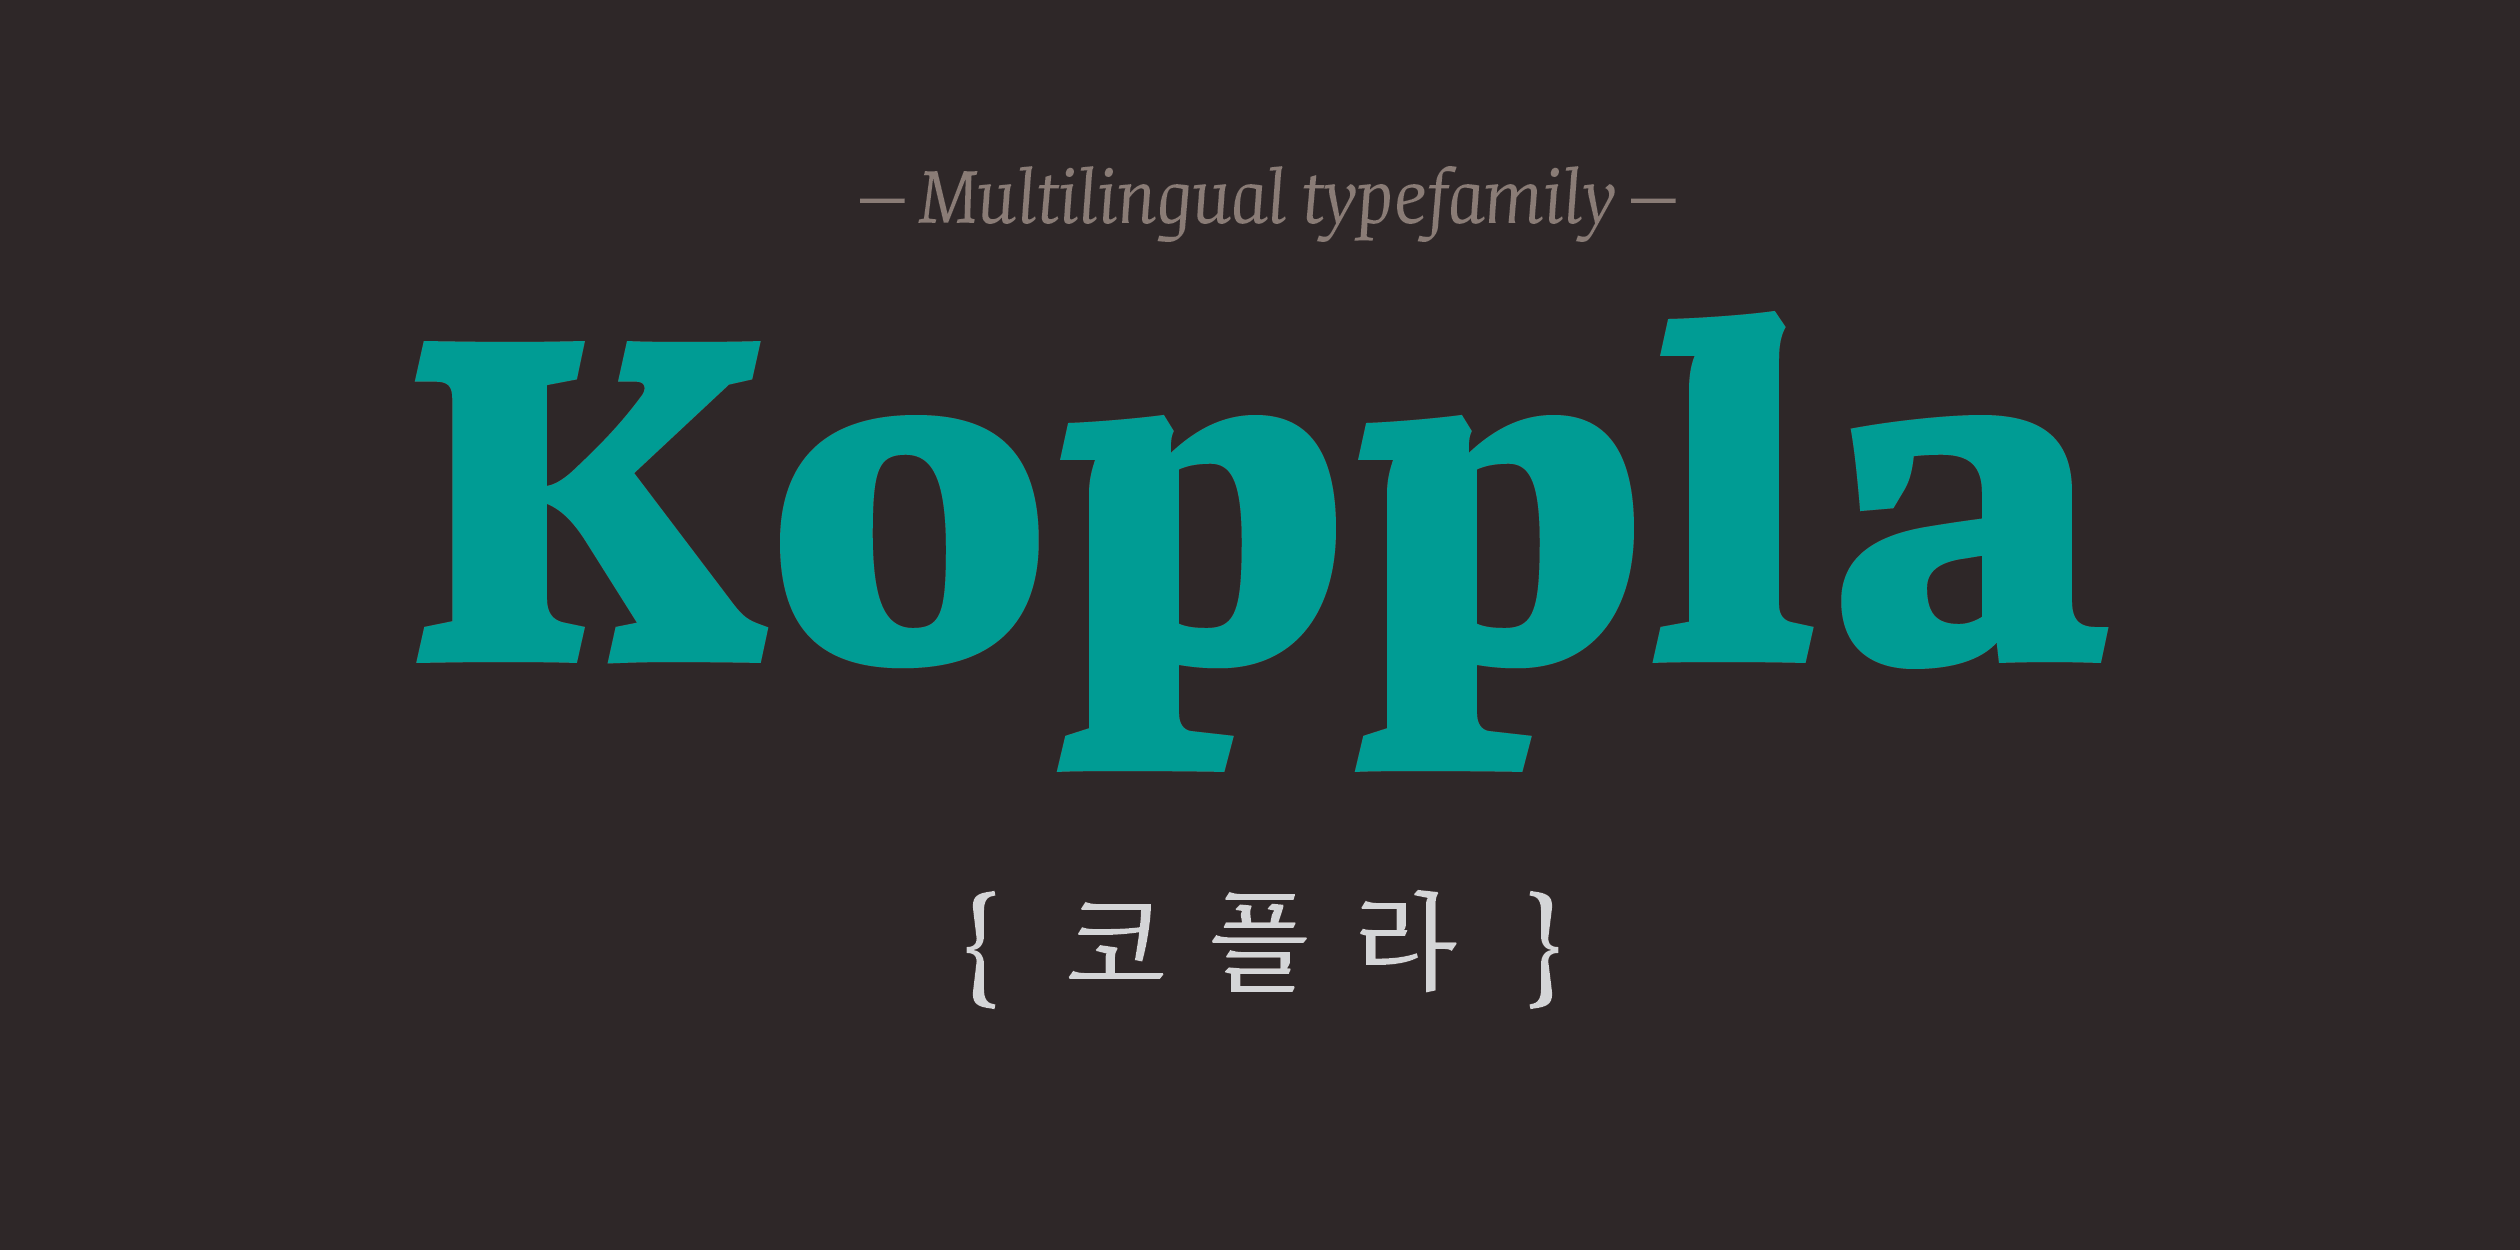 Image of Koppla typeface project from Minjoo Ham